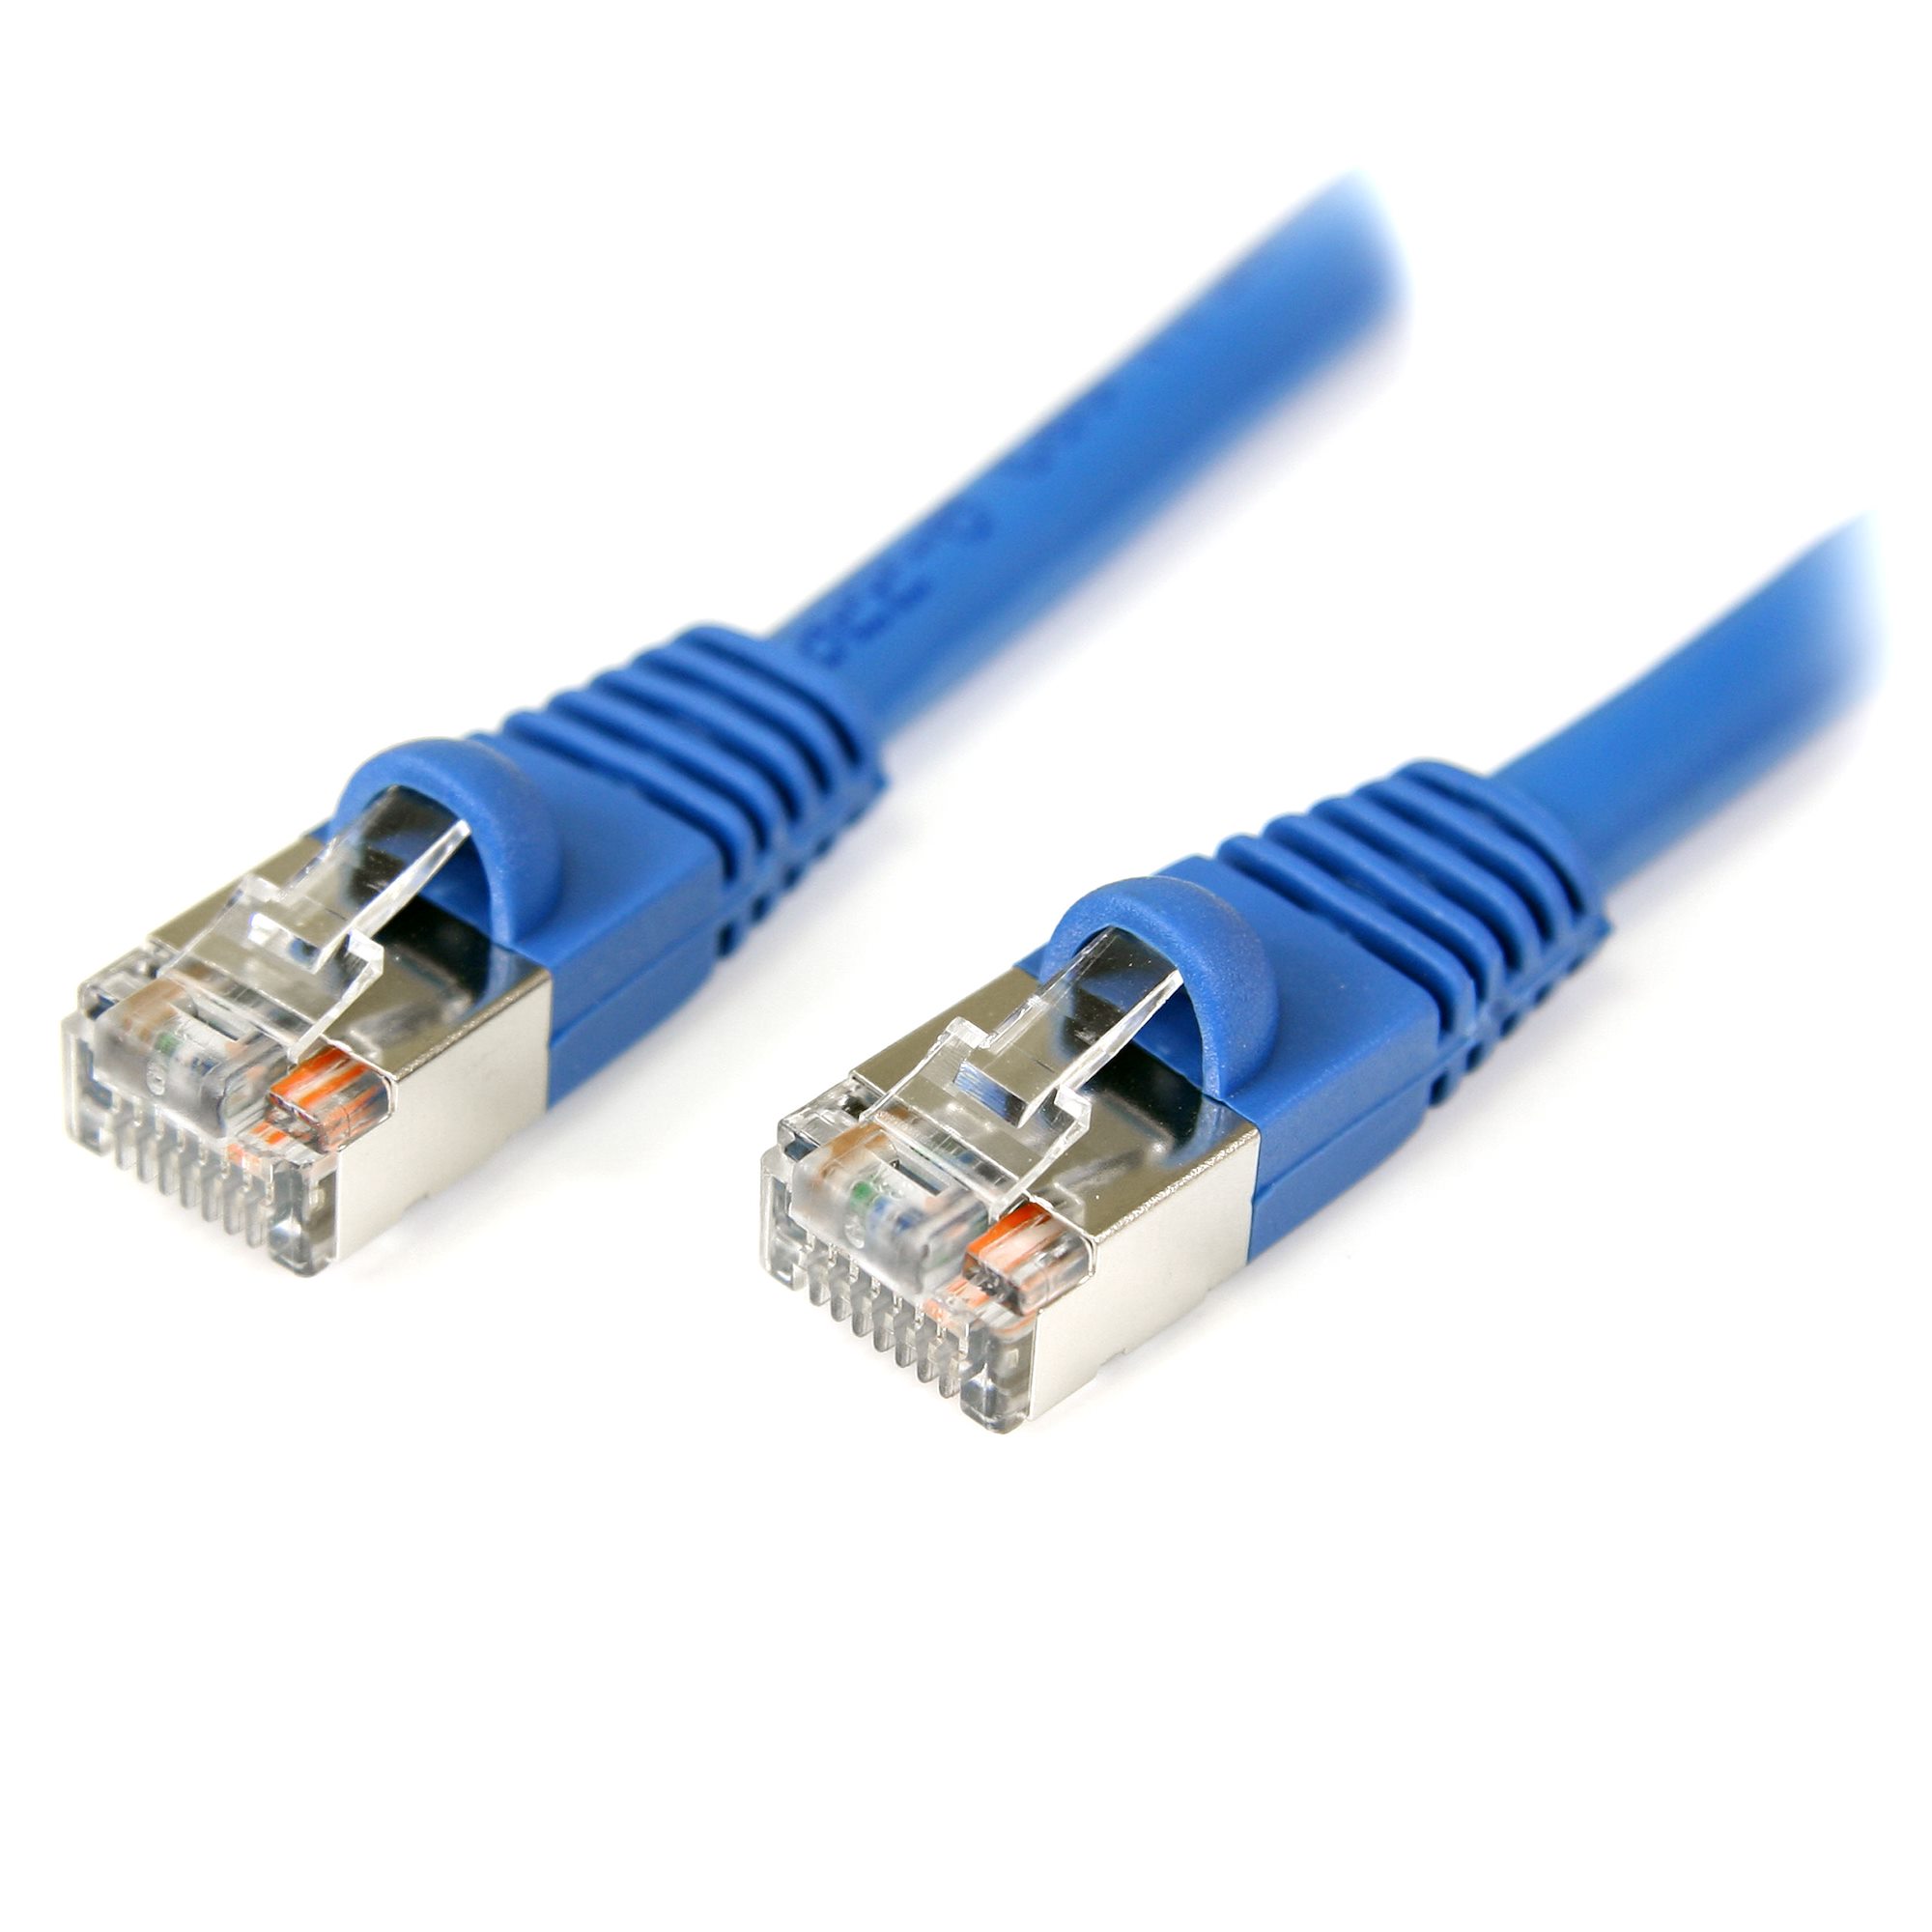 5 Pack 50Ft Cat5e Ethernet RJ45 Lan Wire Network Blue UTP 50 Feet Patch Cable 